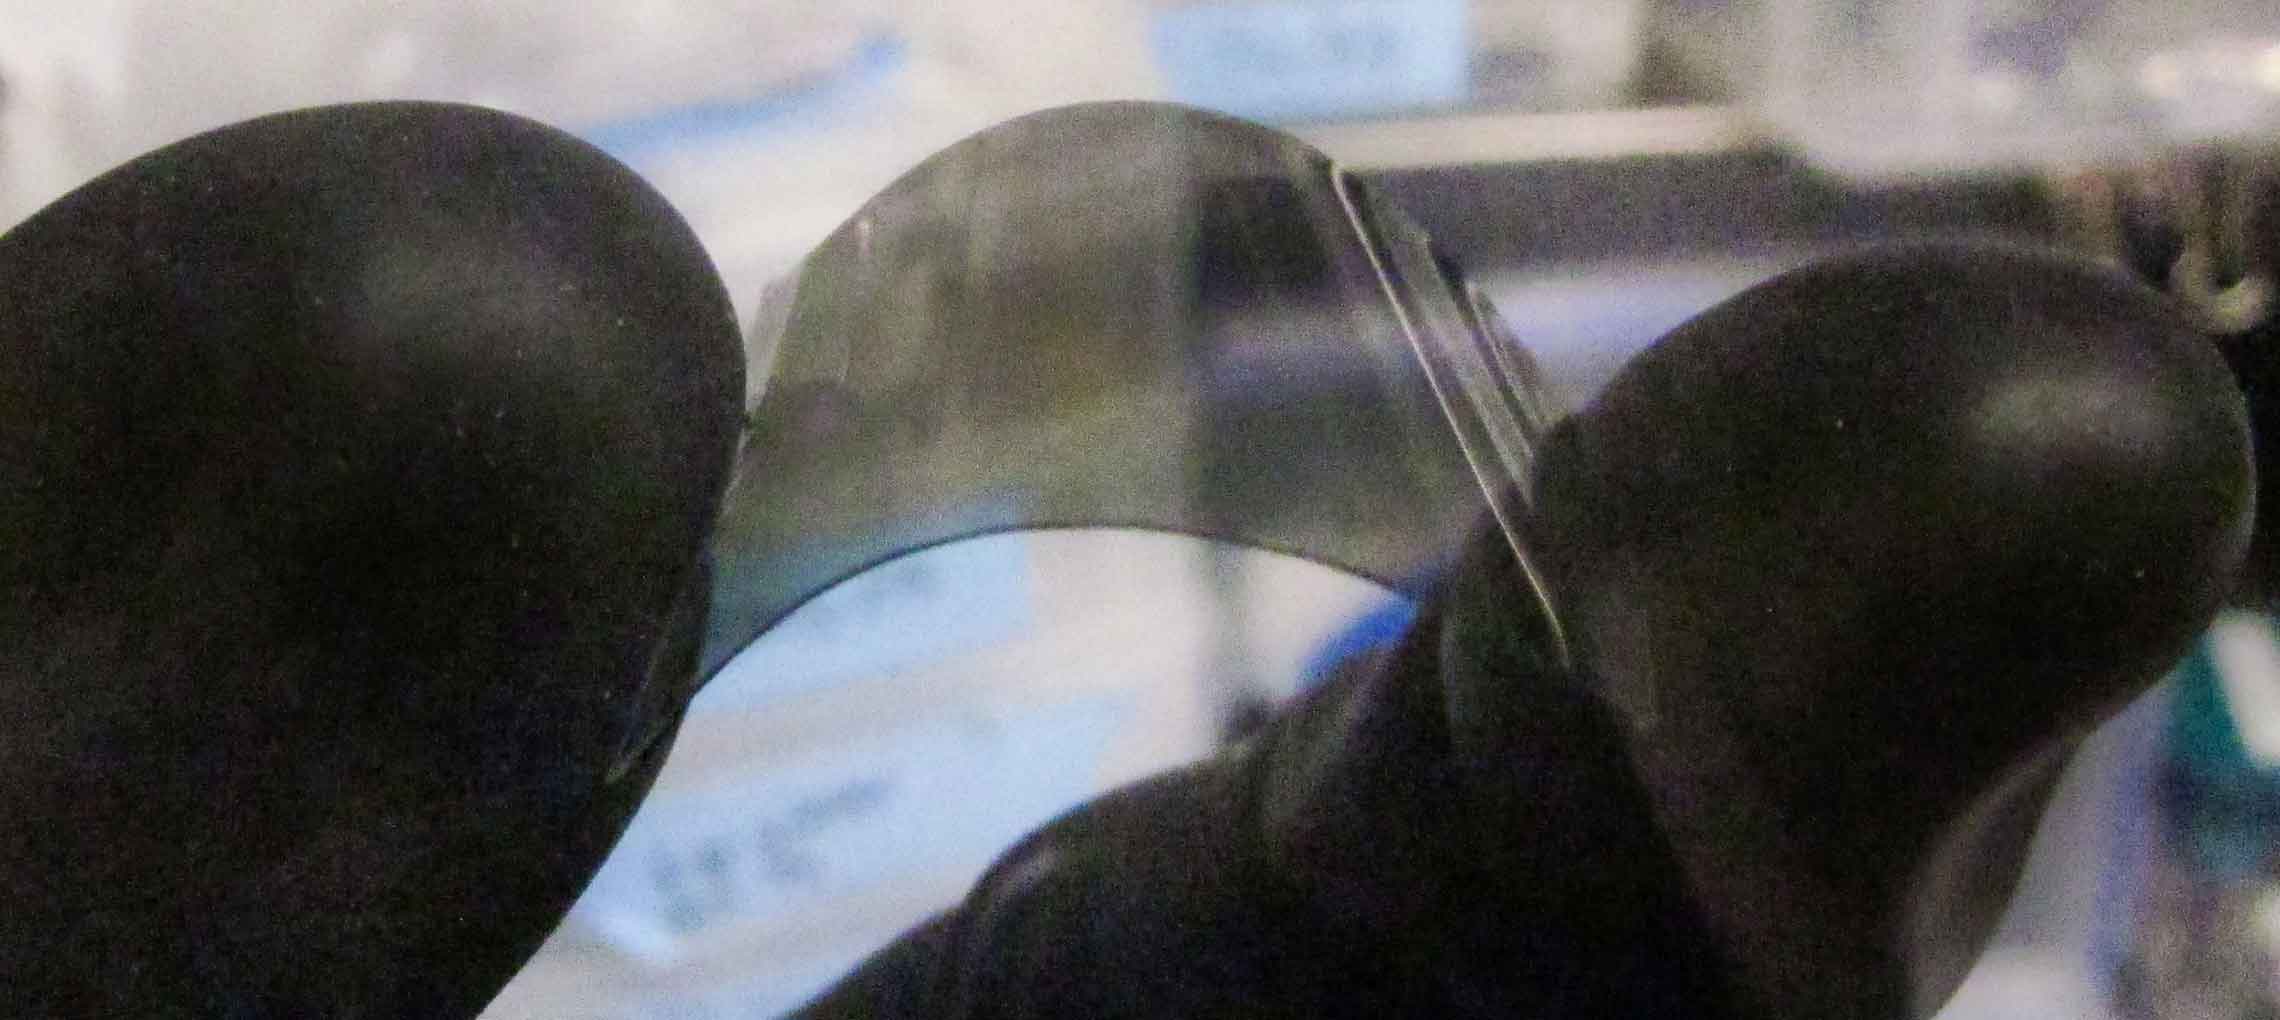 Photo shows a small piece of flexible film held between two fingers.